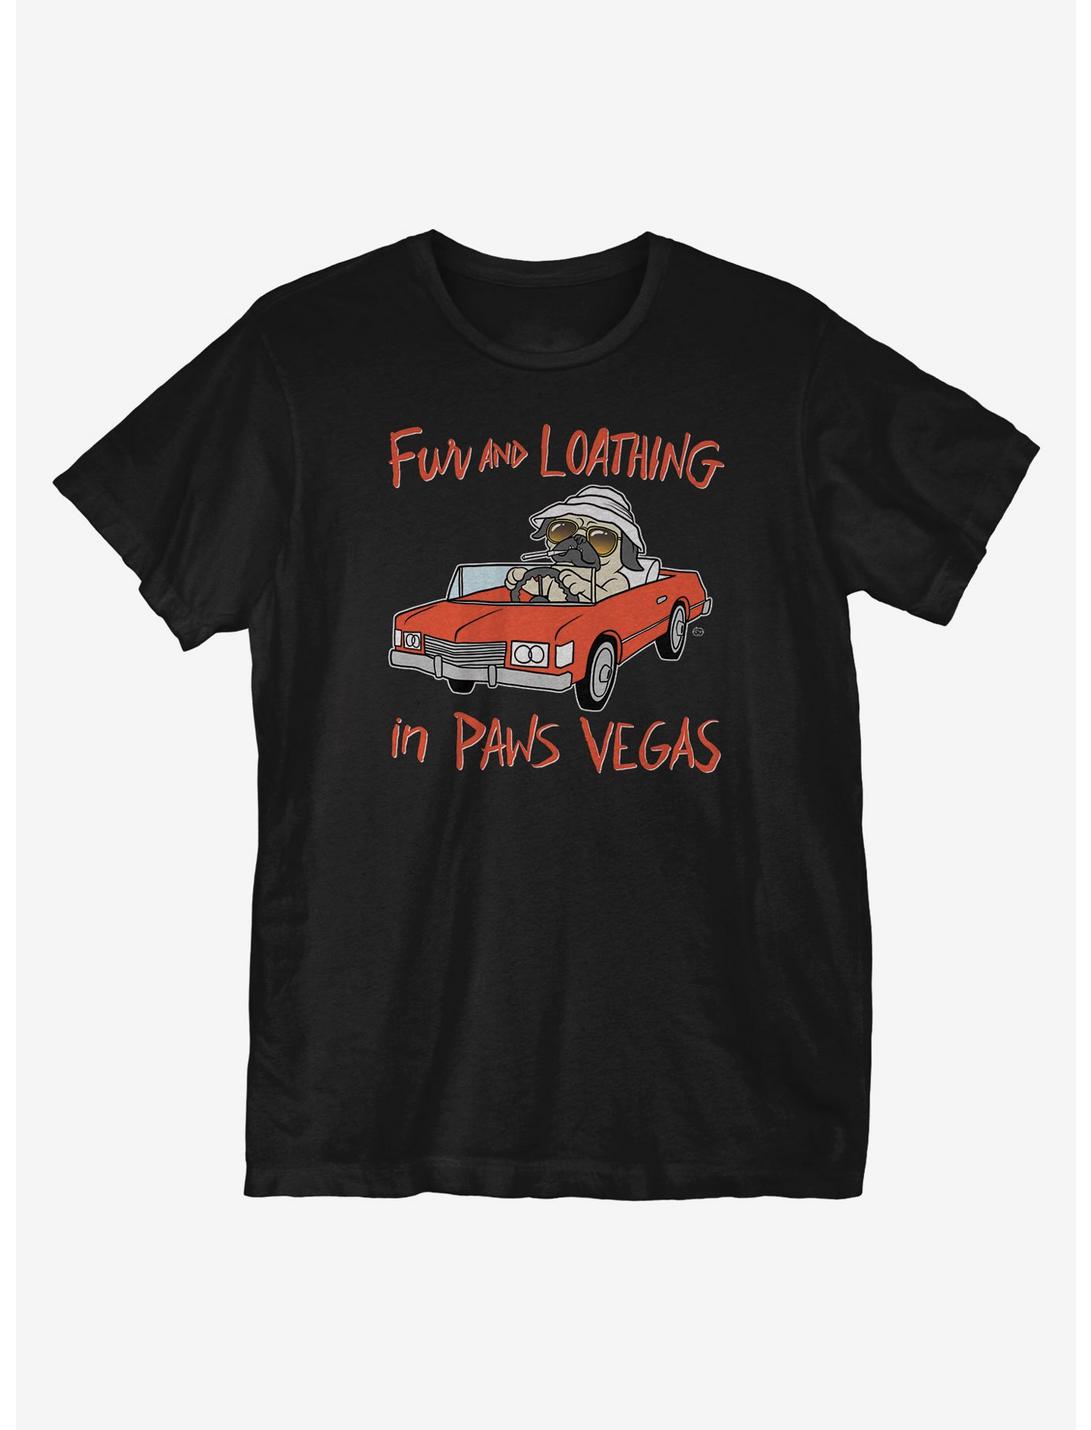 Fur and Loathing T-Shirt, BLACK, hi-res